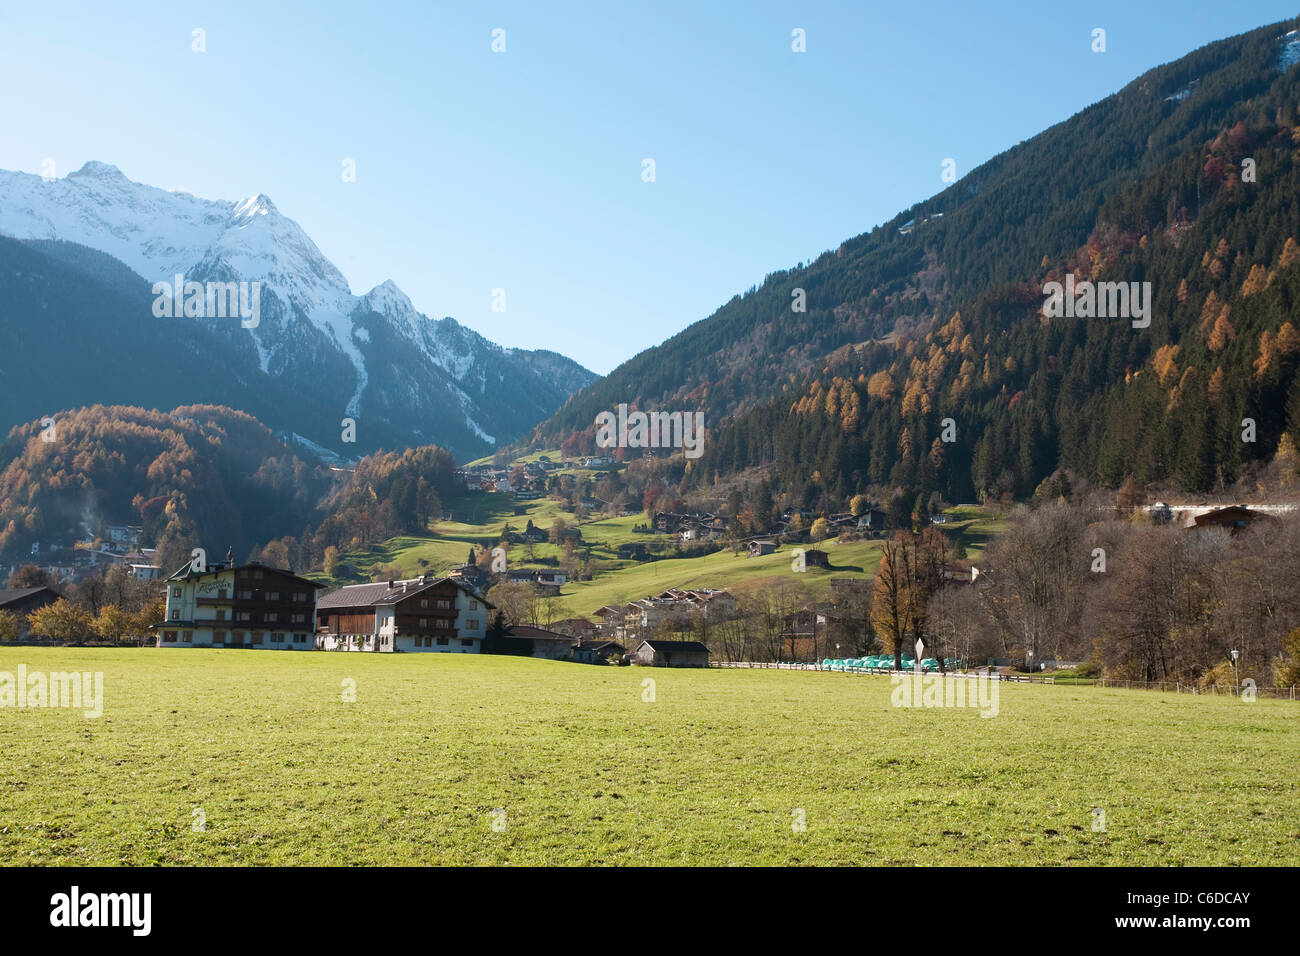 Eingang zum Tuxer Tal, bei Mayrhofen, Entry to the Tuxer valley, close Mayrhofen Stock Photo